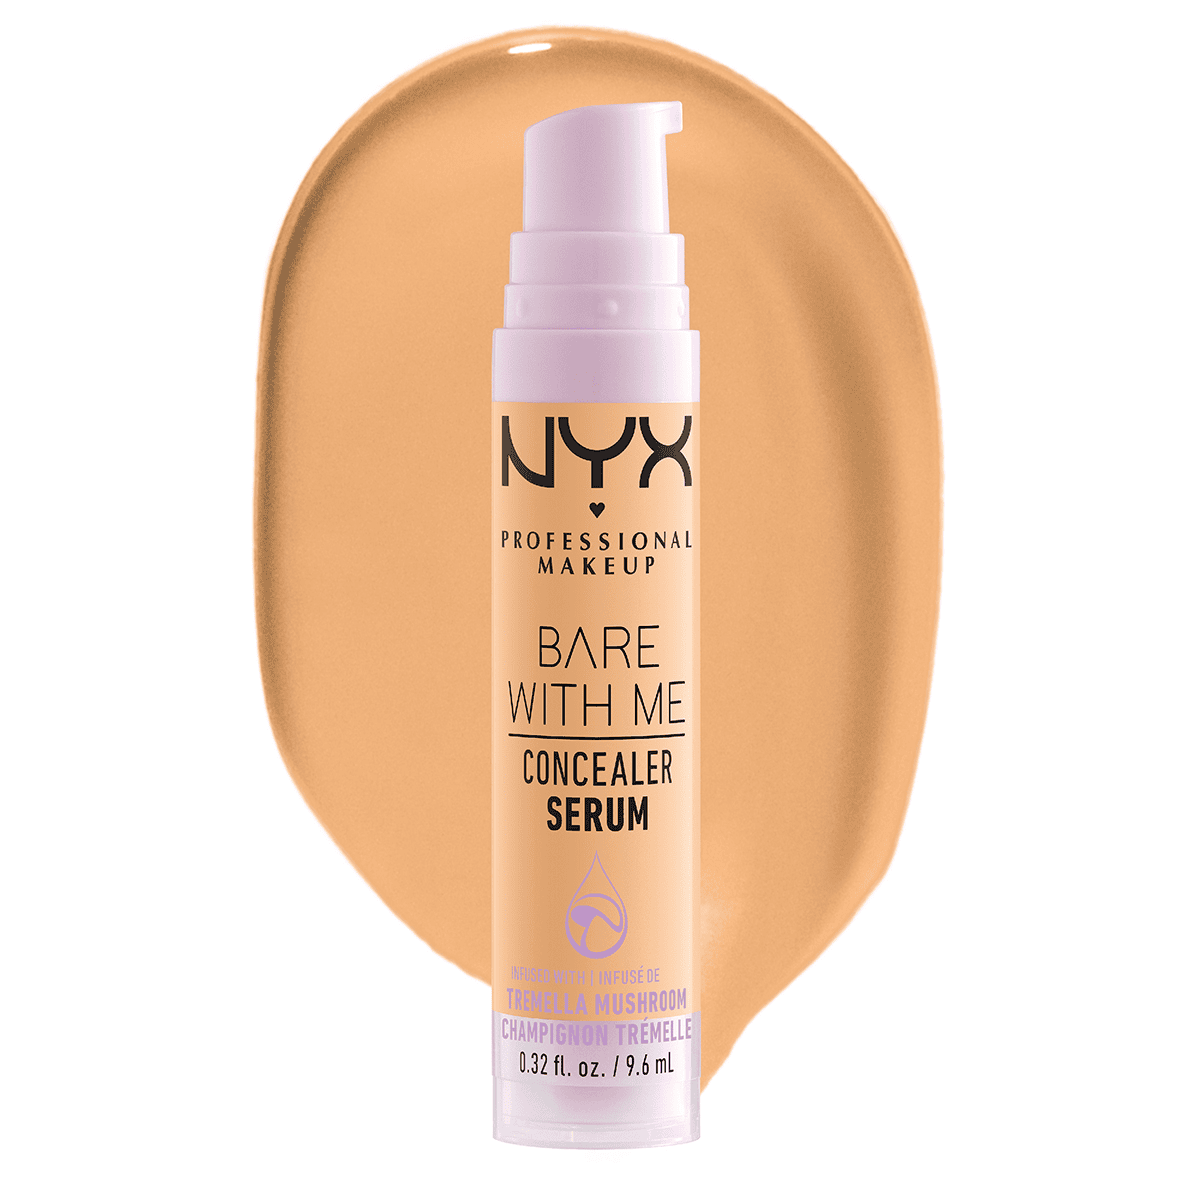 Nyx Bare With Me Concealer Serum - AllurebeautypkNyx Bare With Me Concealer Serum